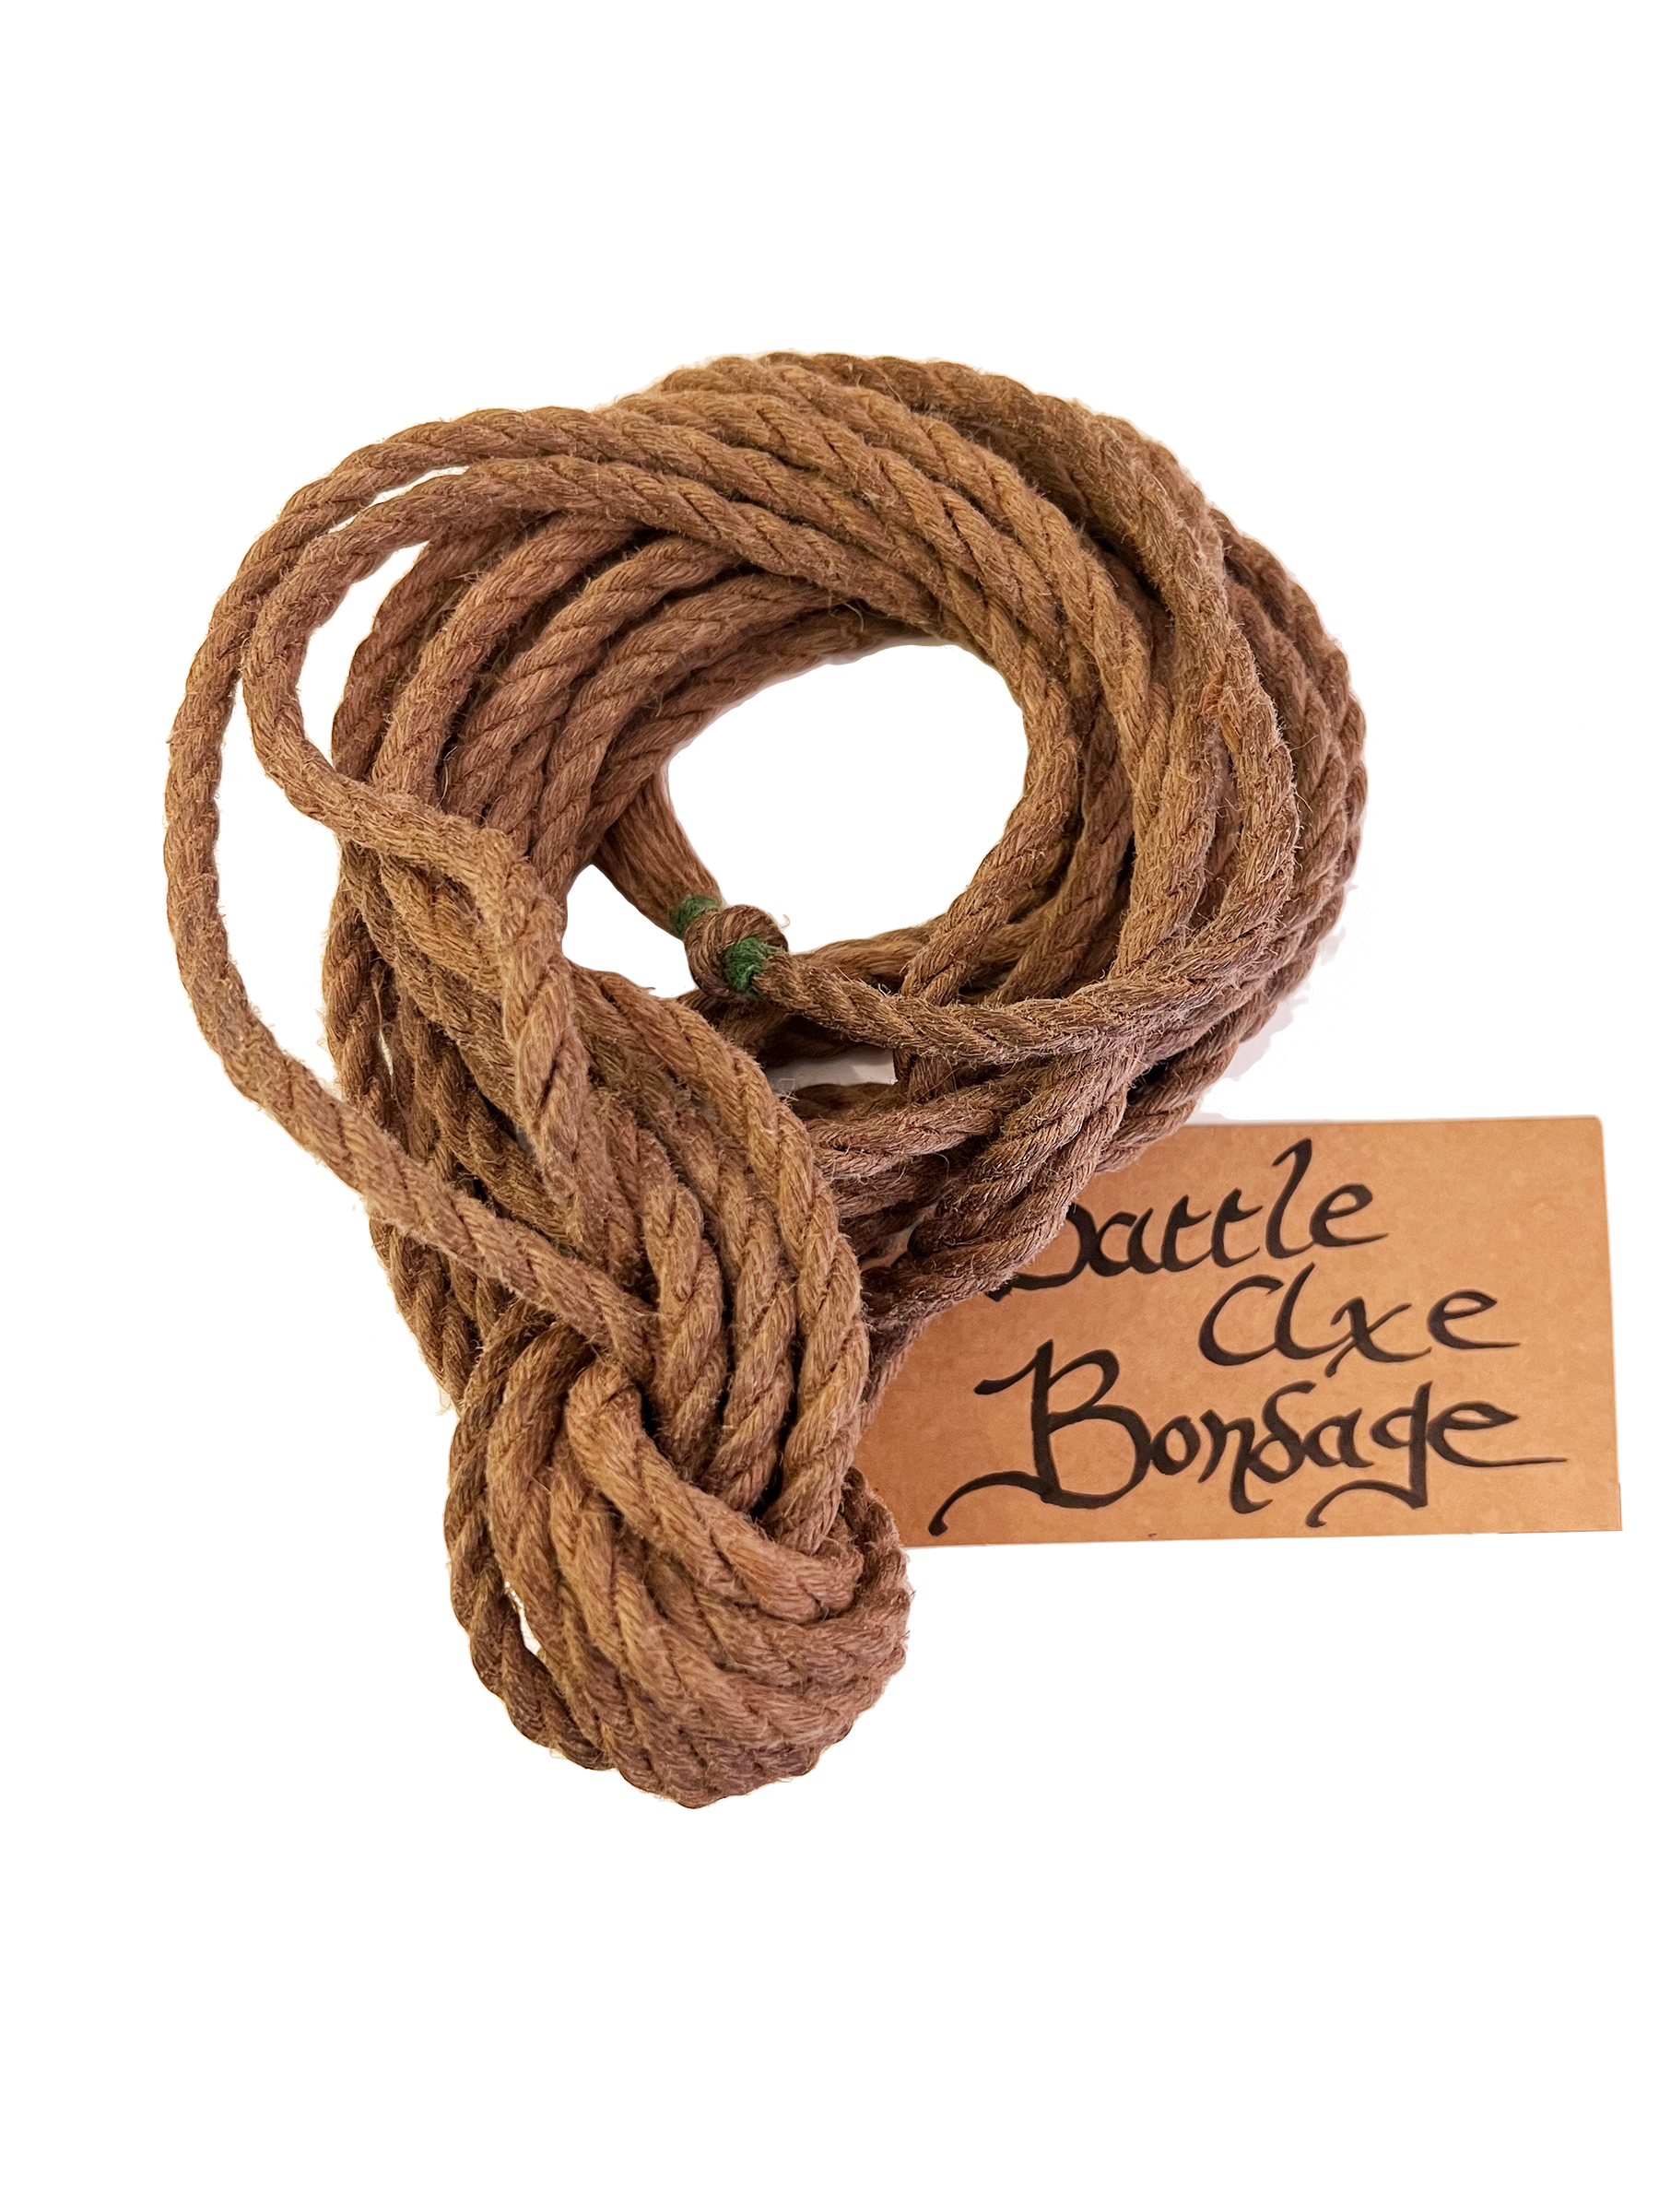 Battle Axe Jute Bondage Rope - Come As You Are